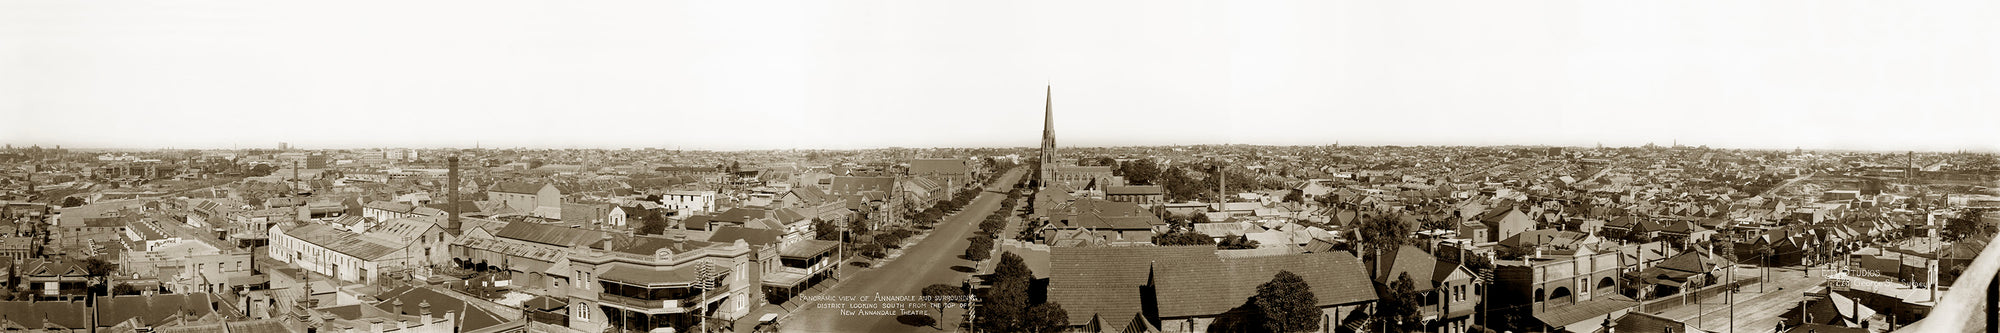 Panoramic View of Johnston Street Looking South, Annandale NSW Australia c.1928